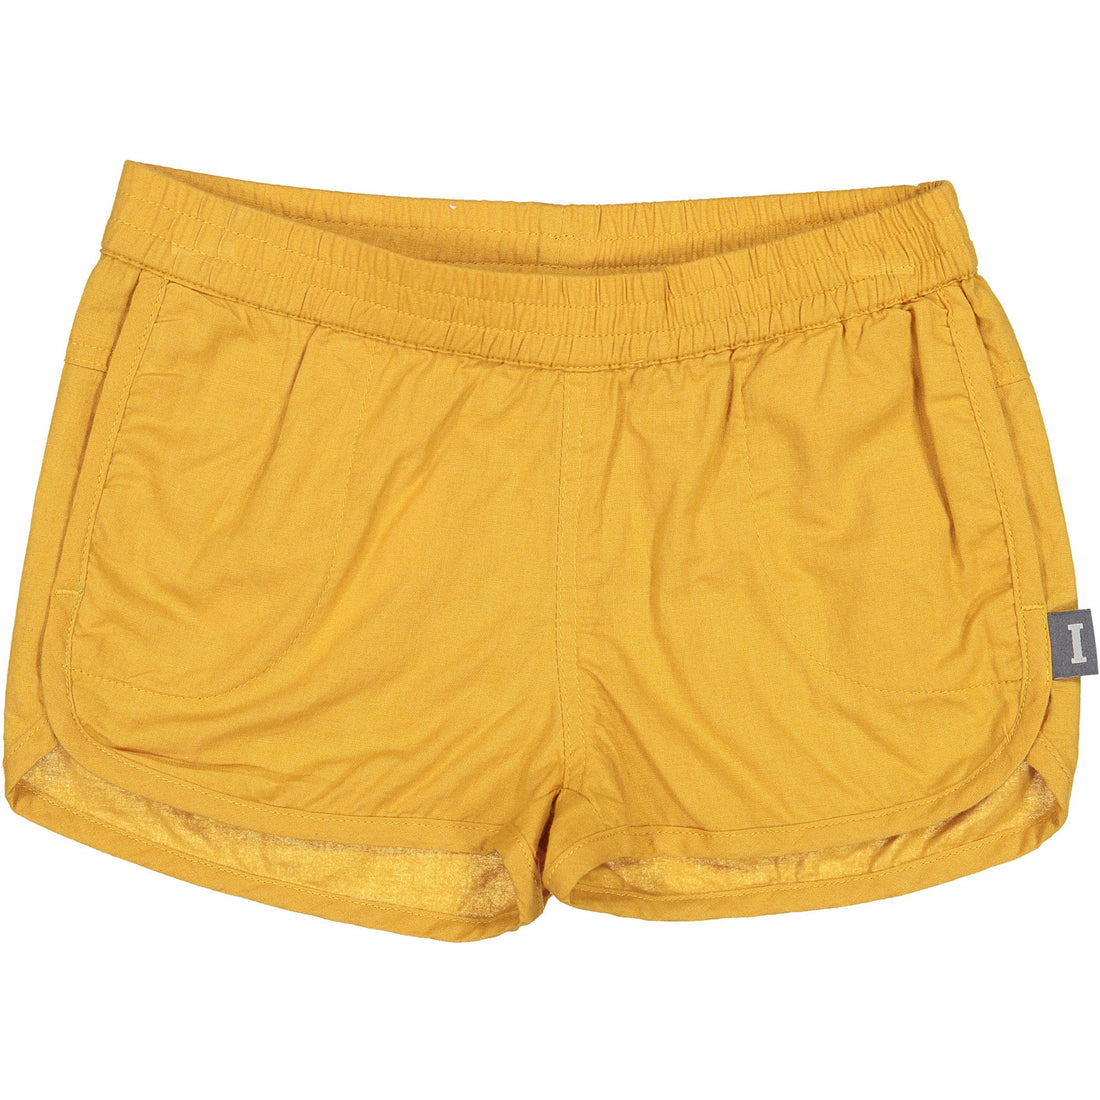 Imps and Elfs Gold Gym Shorts